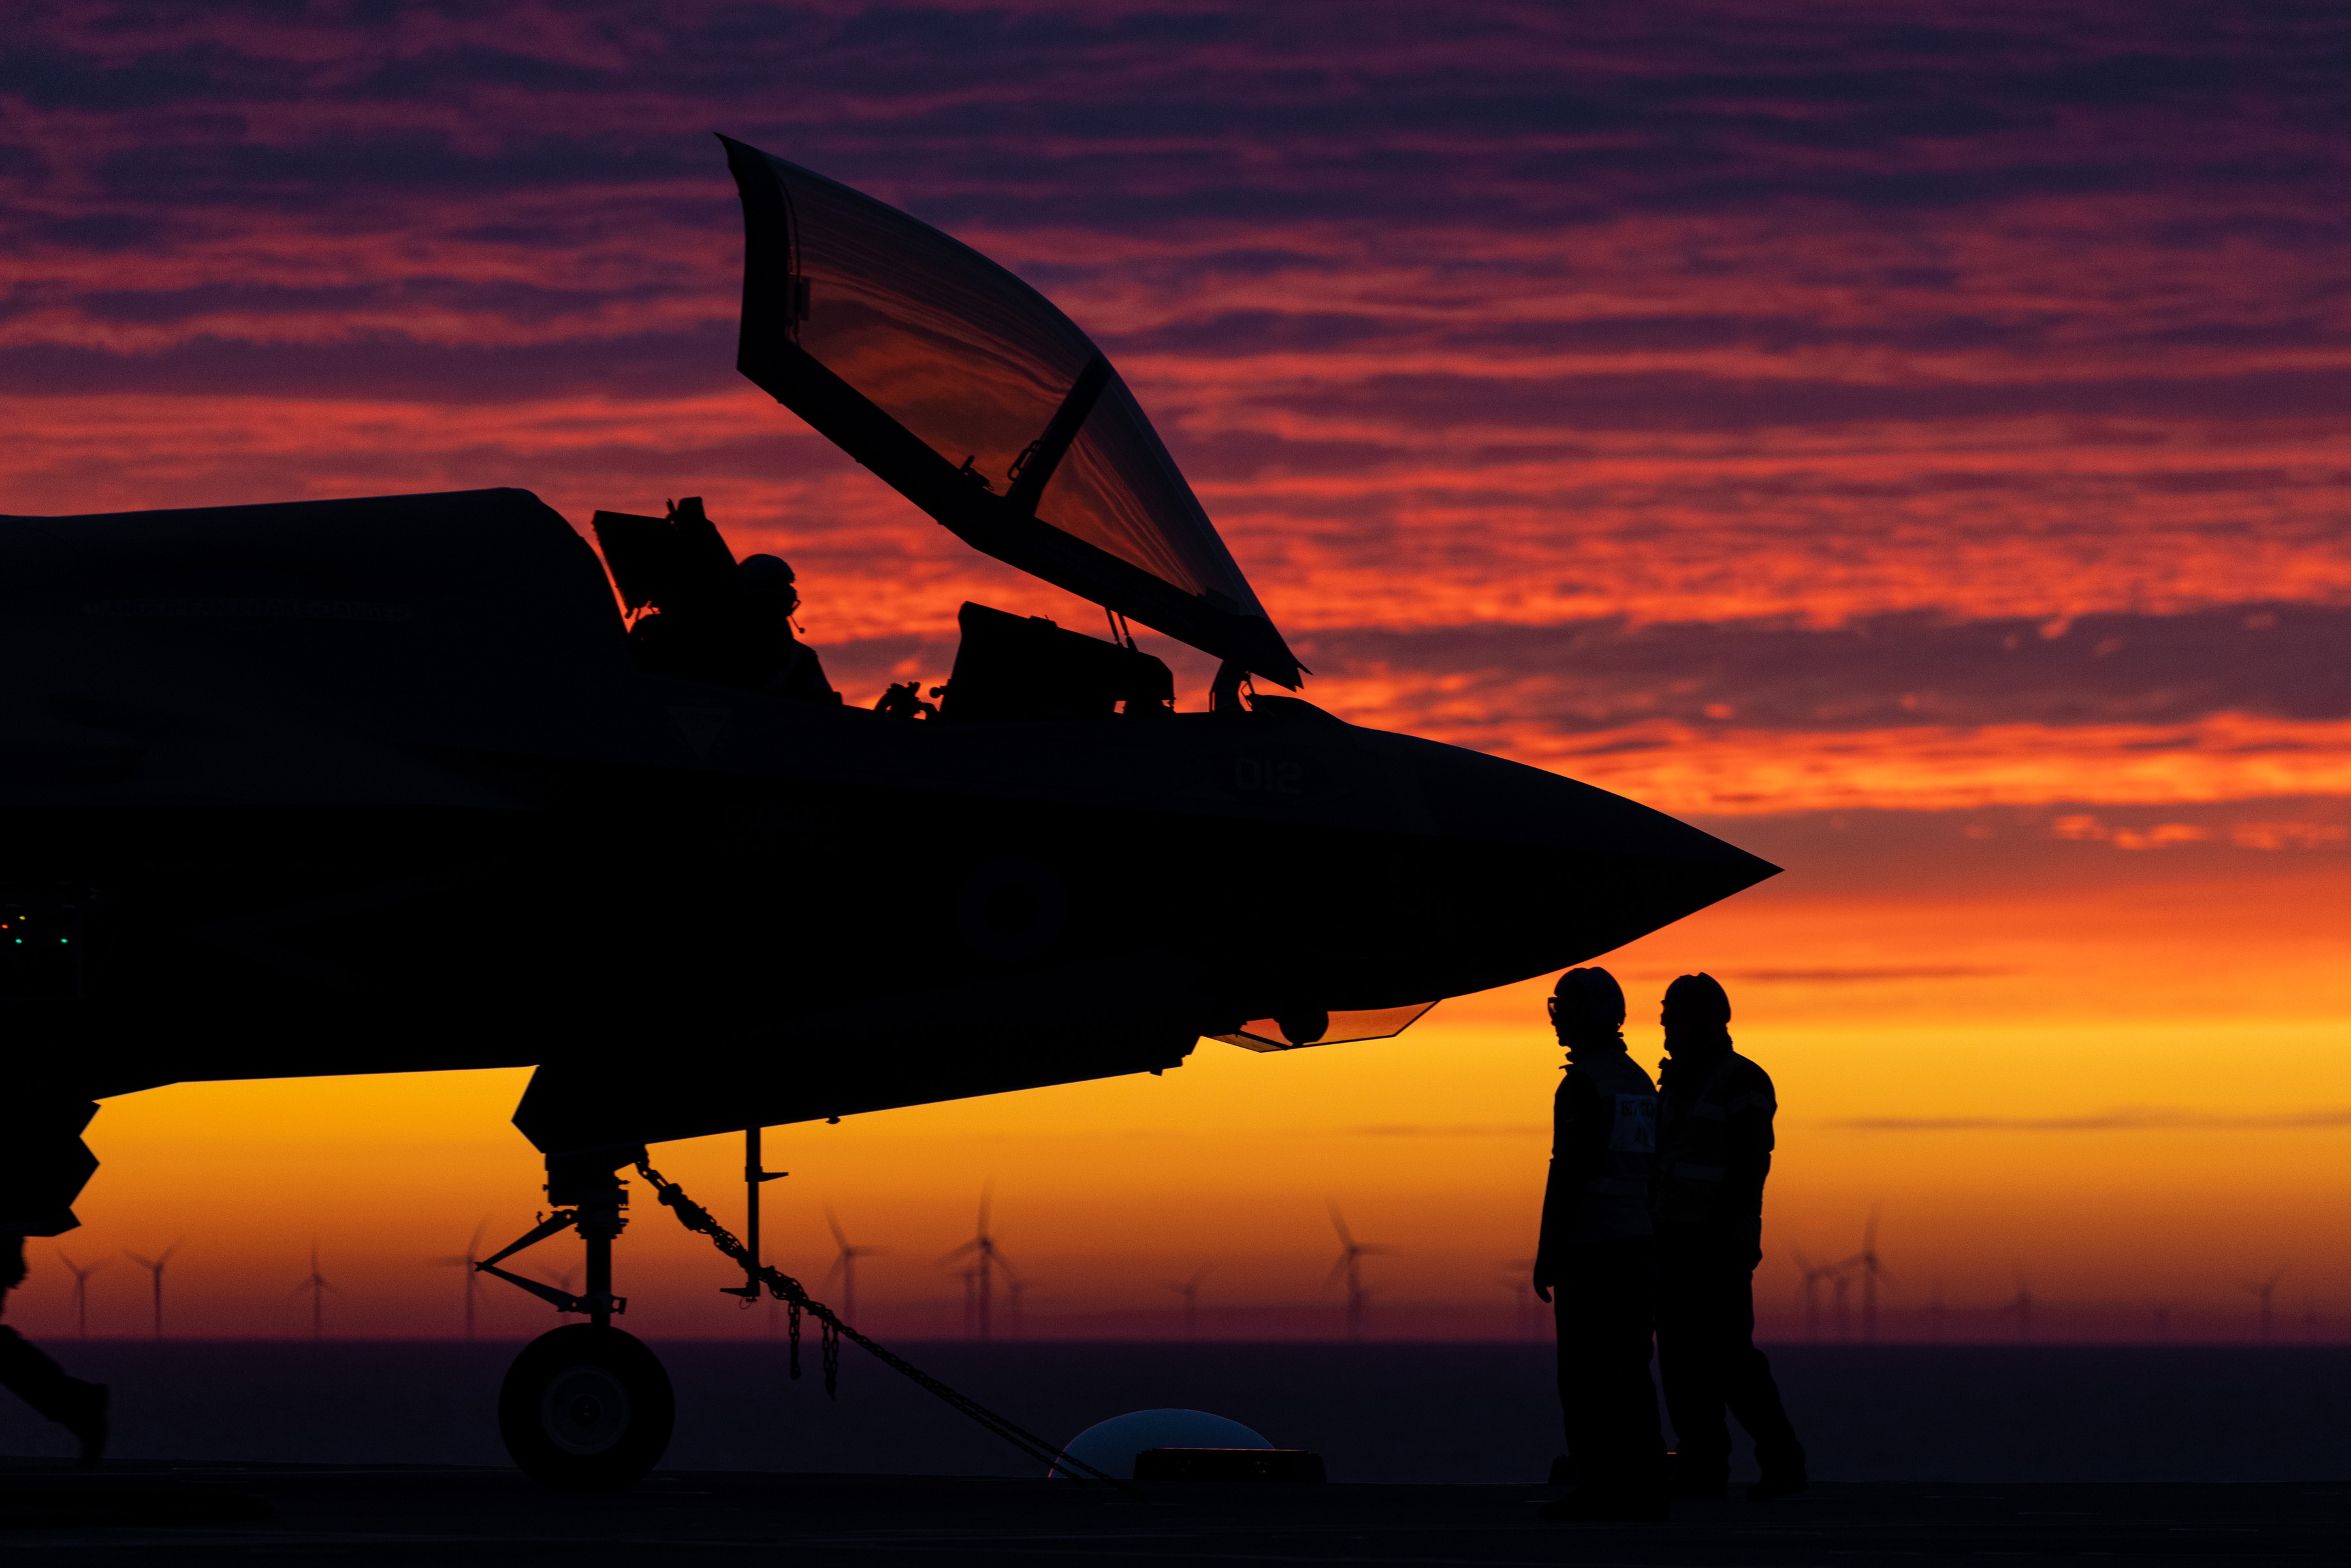 Image shows the open cockpit of a RAF Typhoon and pilots on the airfield during a sunset.